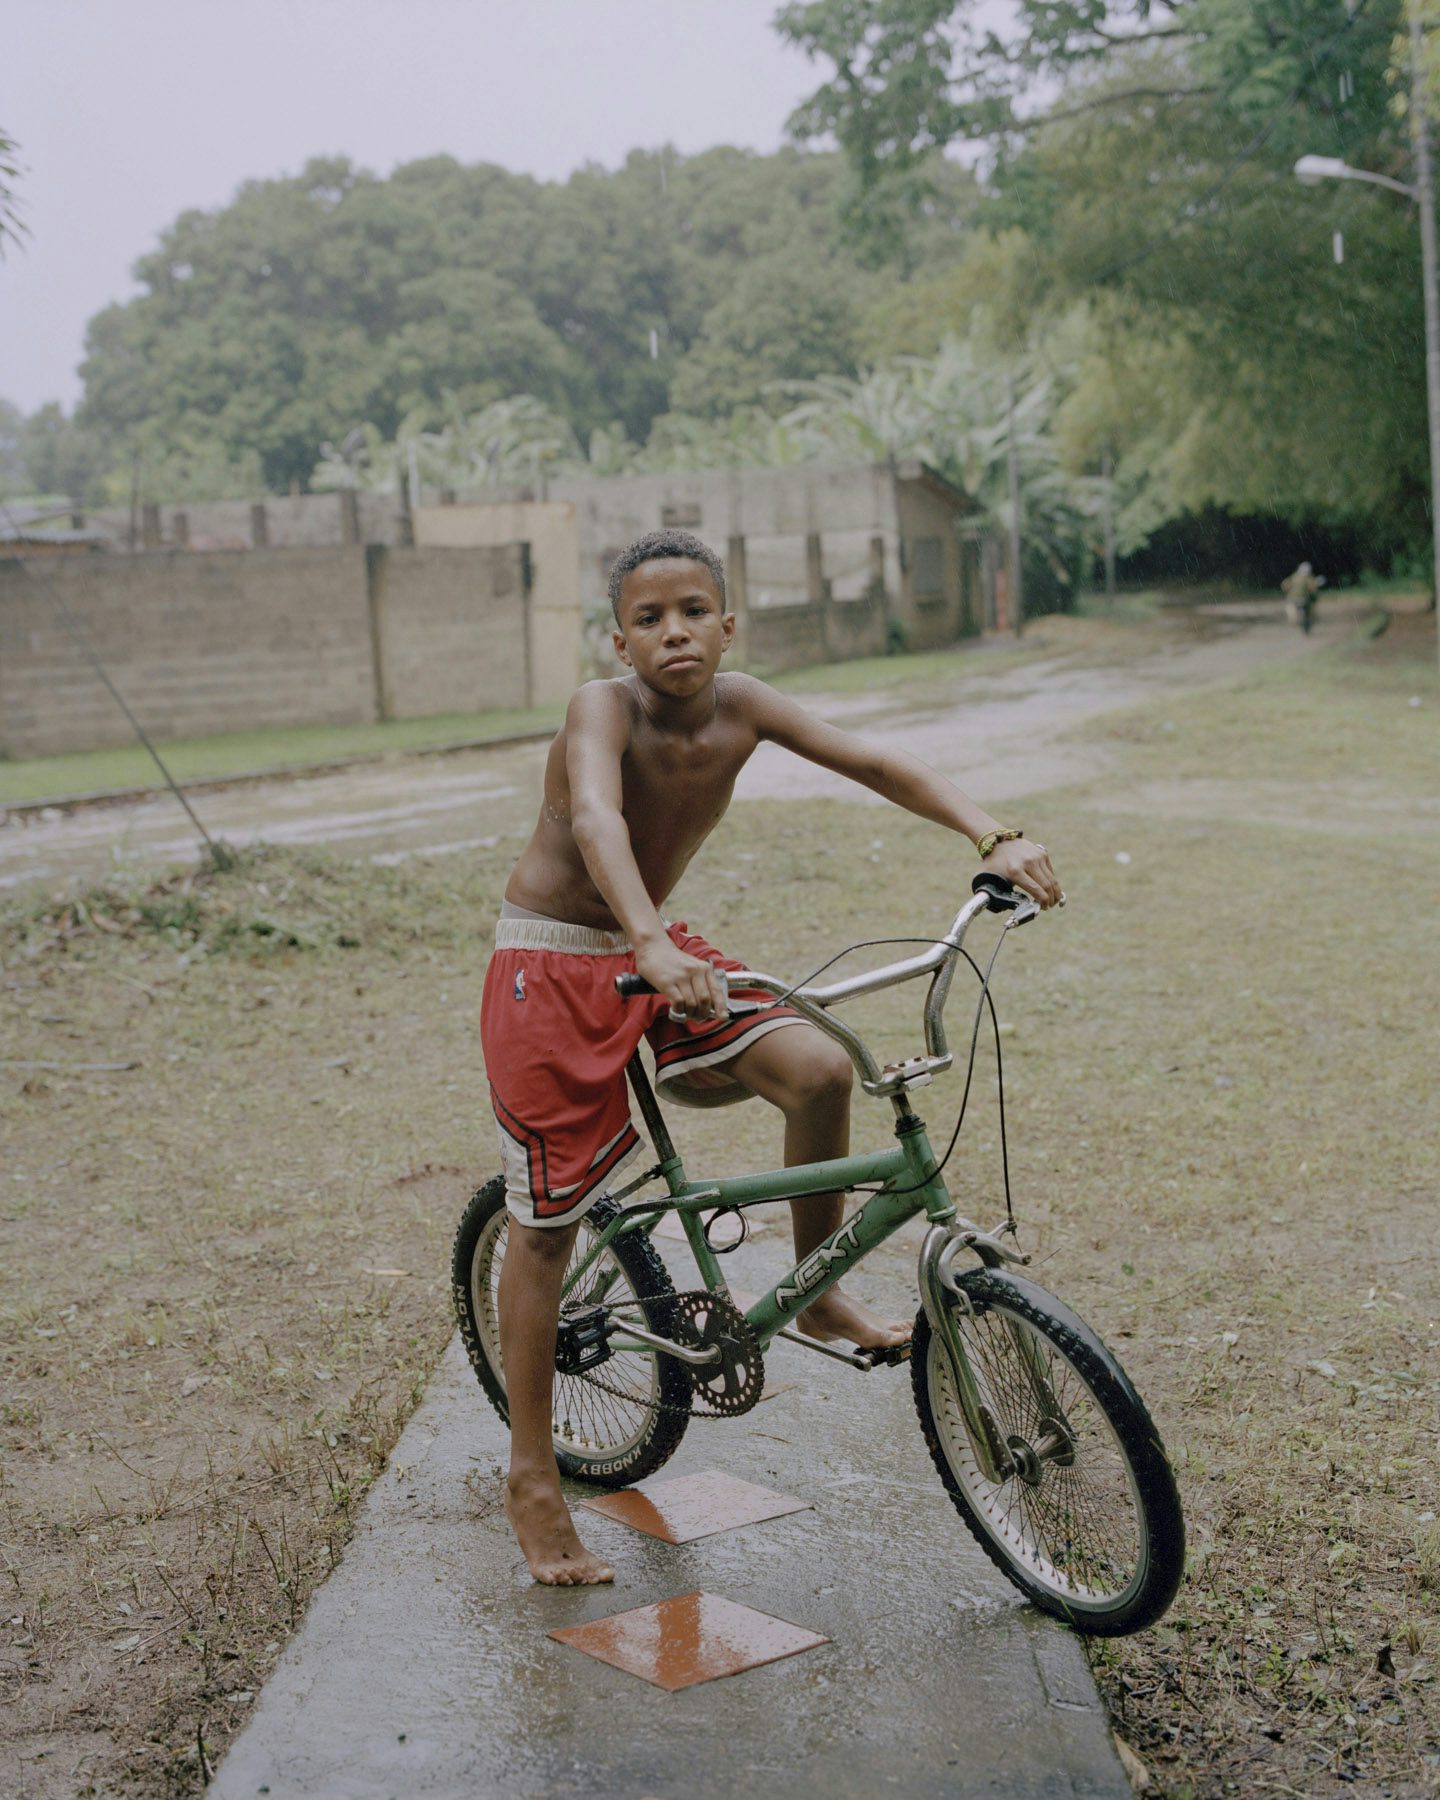 Image by Silvana Trevale of a young boy on a bike pausing on a wet pathway